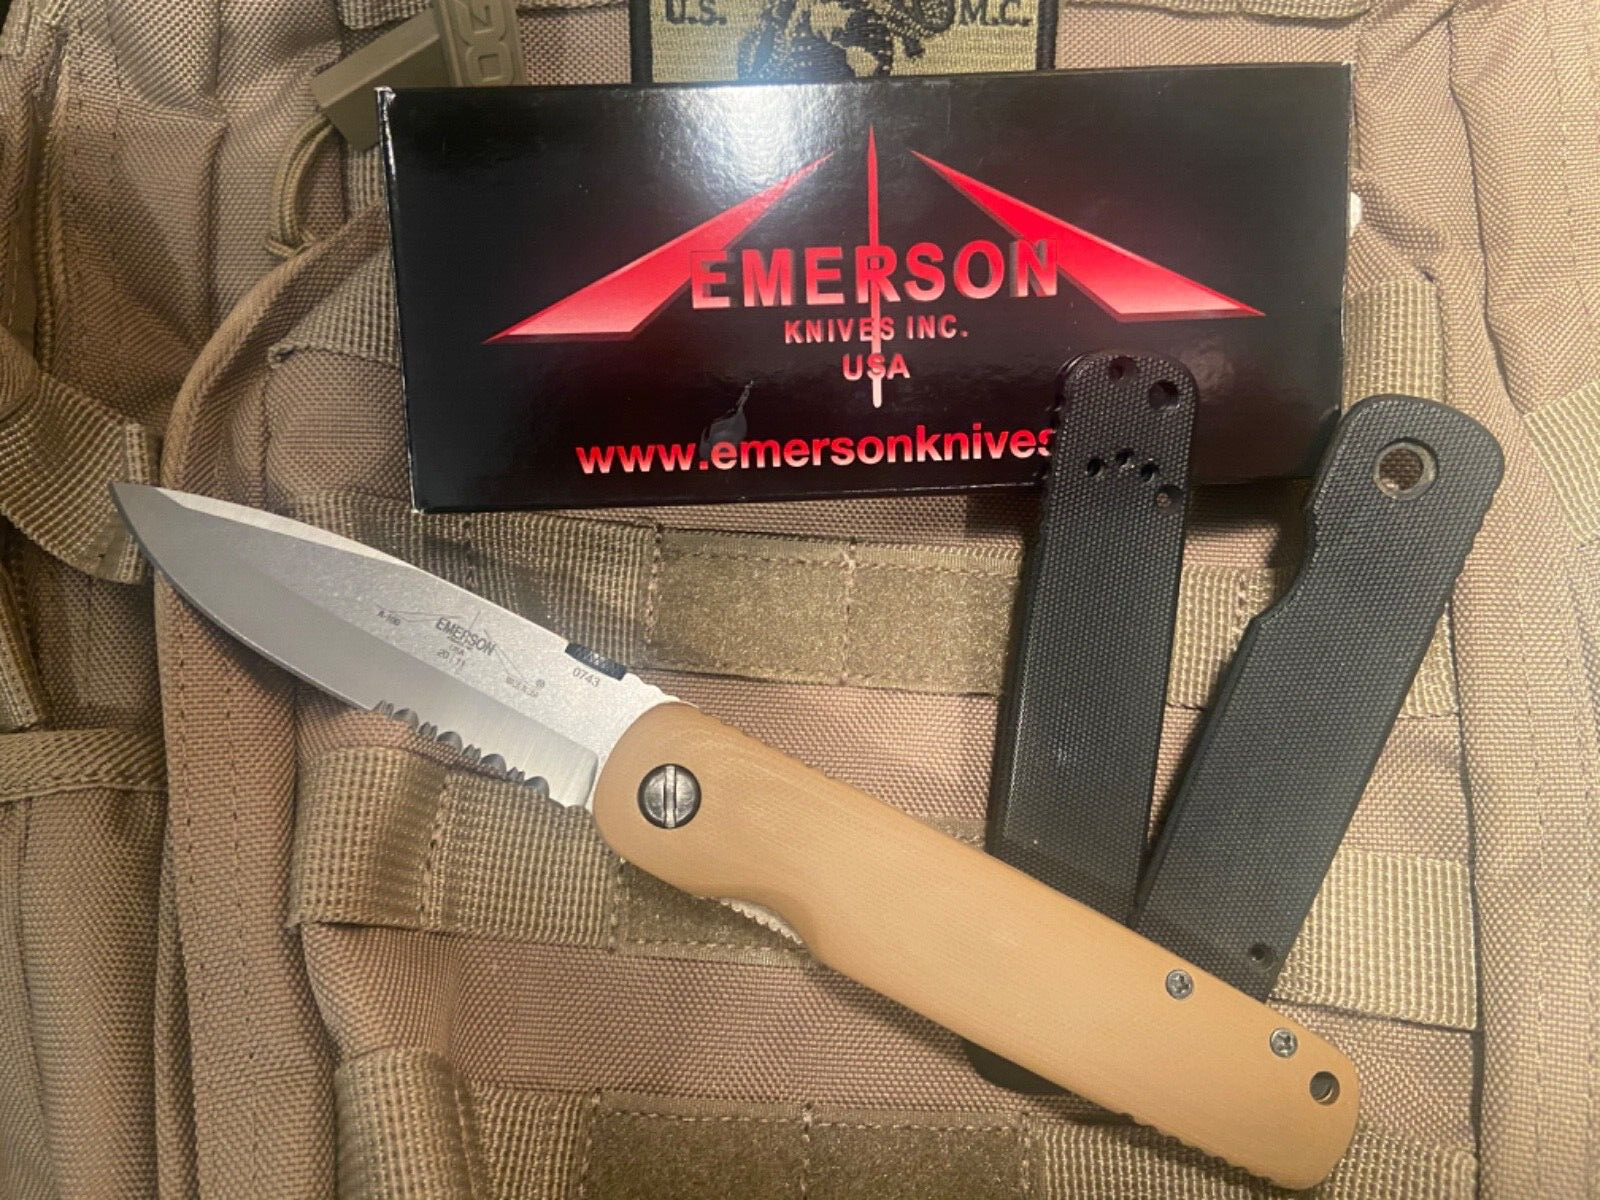 Emerson A-100 serrated, stone washed knife.